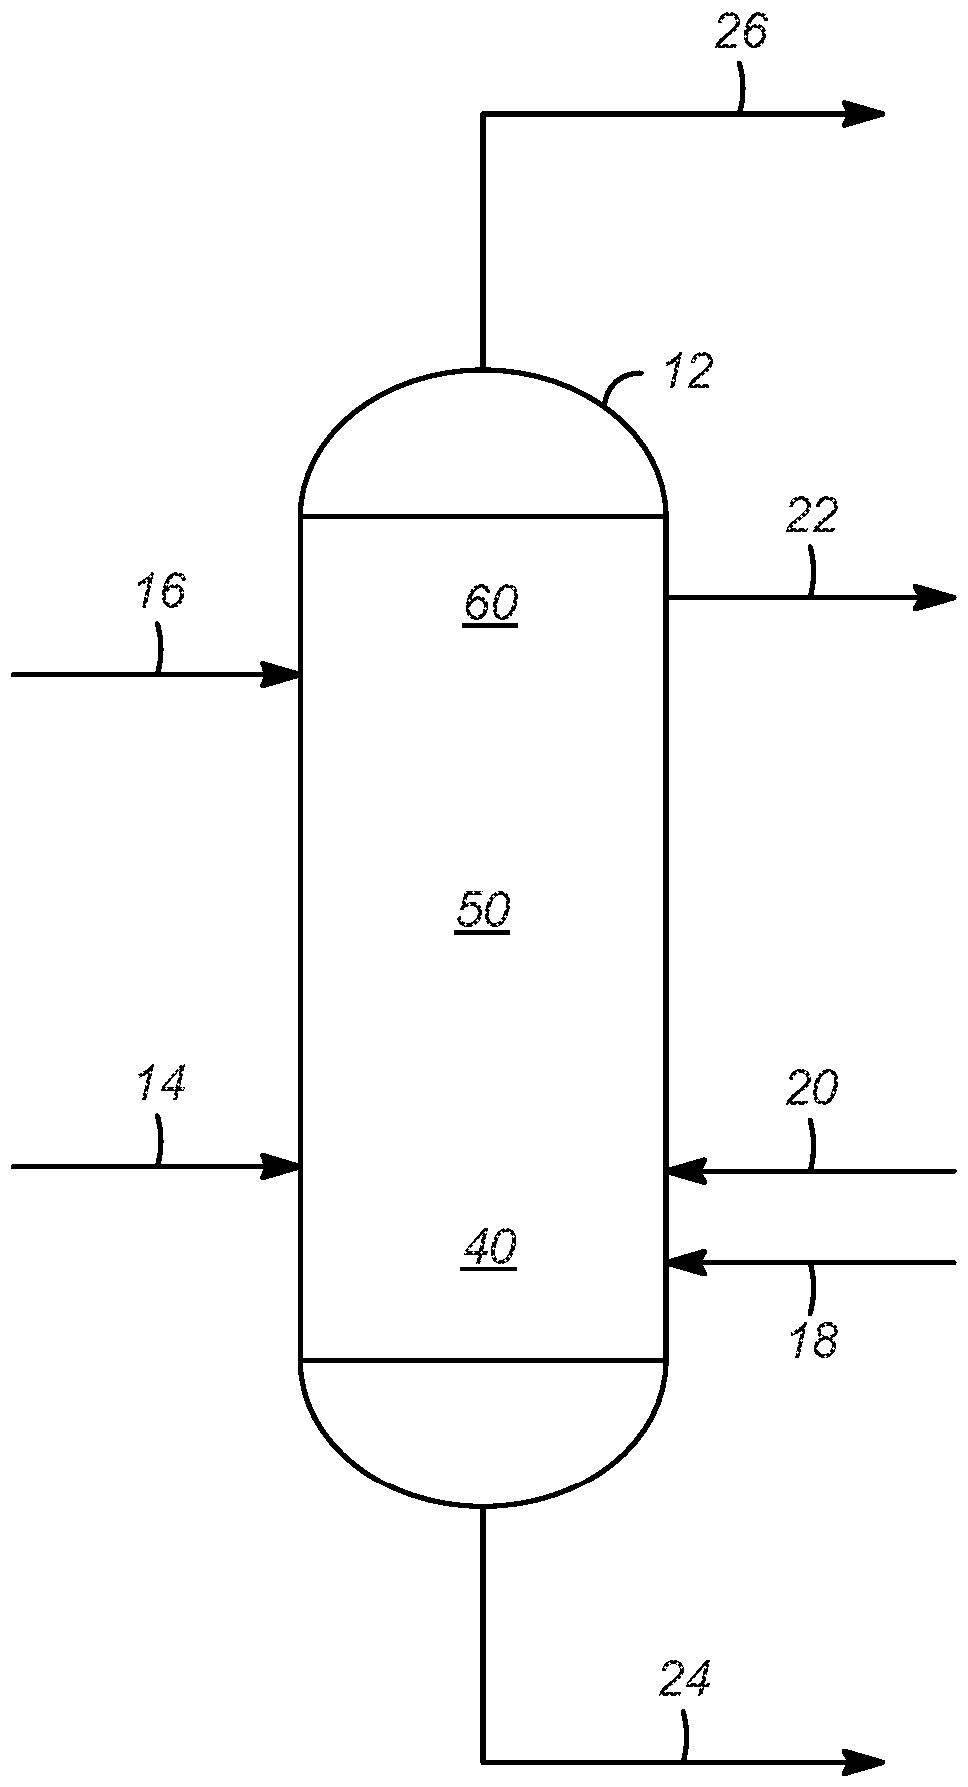 Process and apparatus for removing aldehydes from acetone